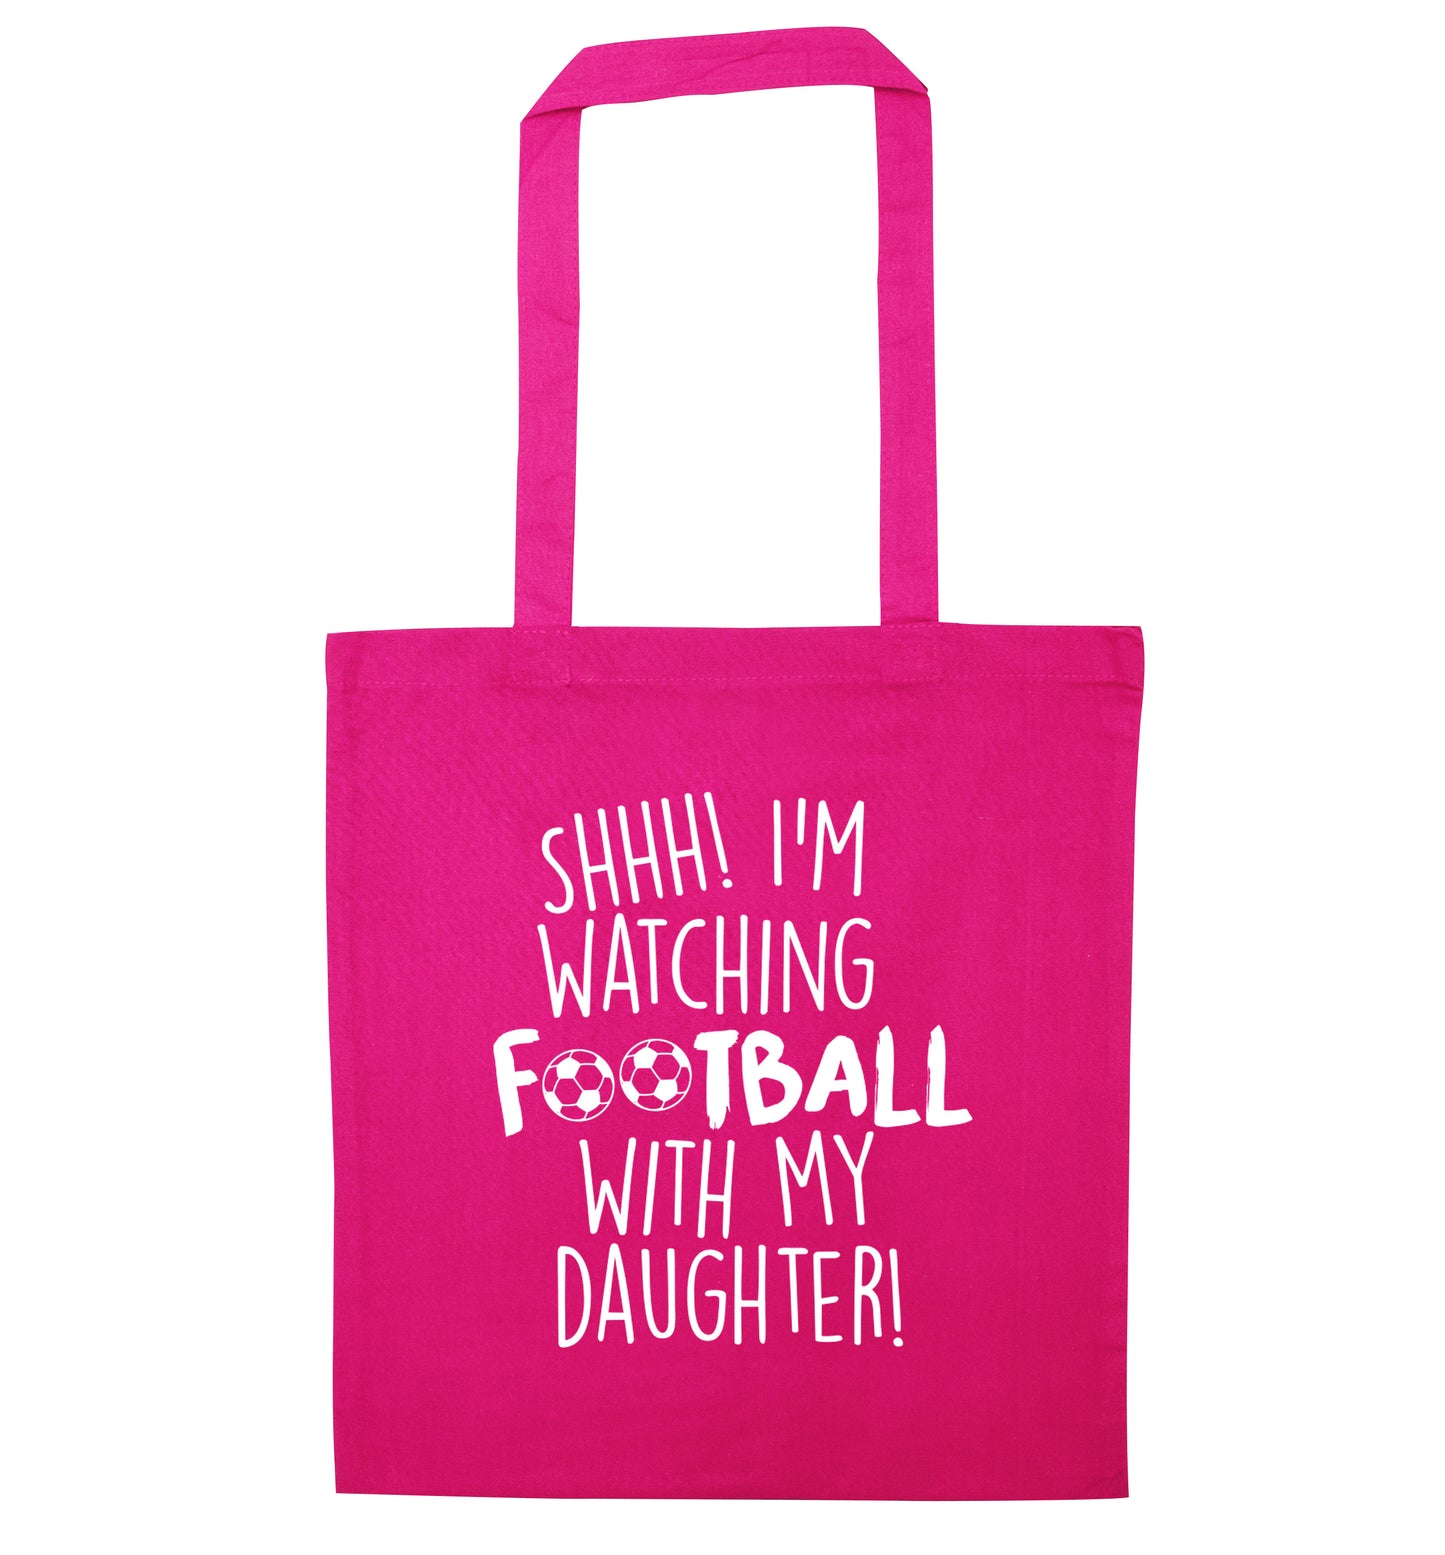 Shhh I'm watching football with my daughter pink tote bag